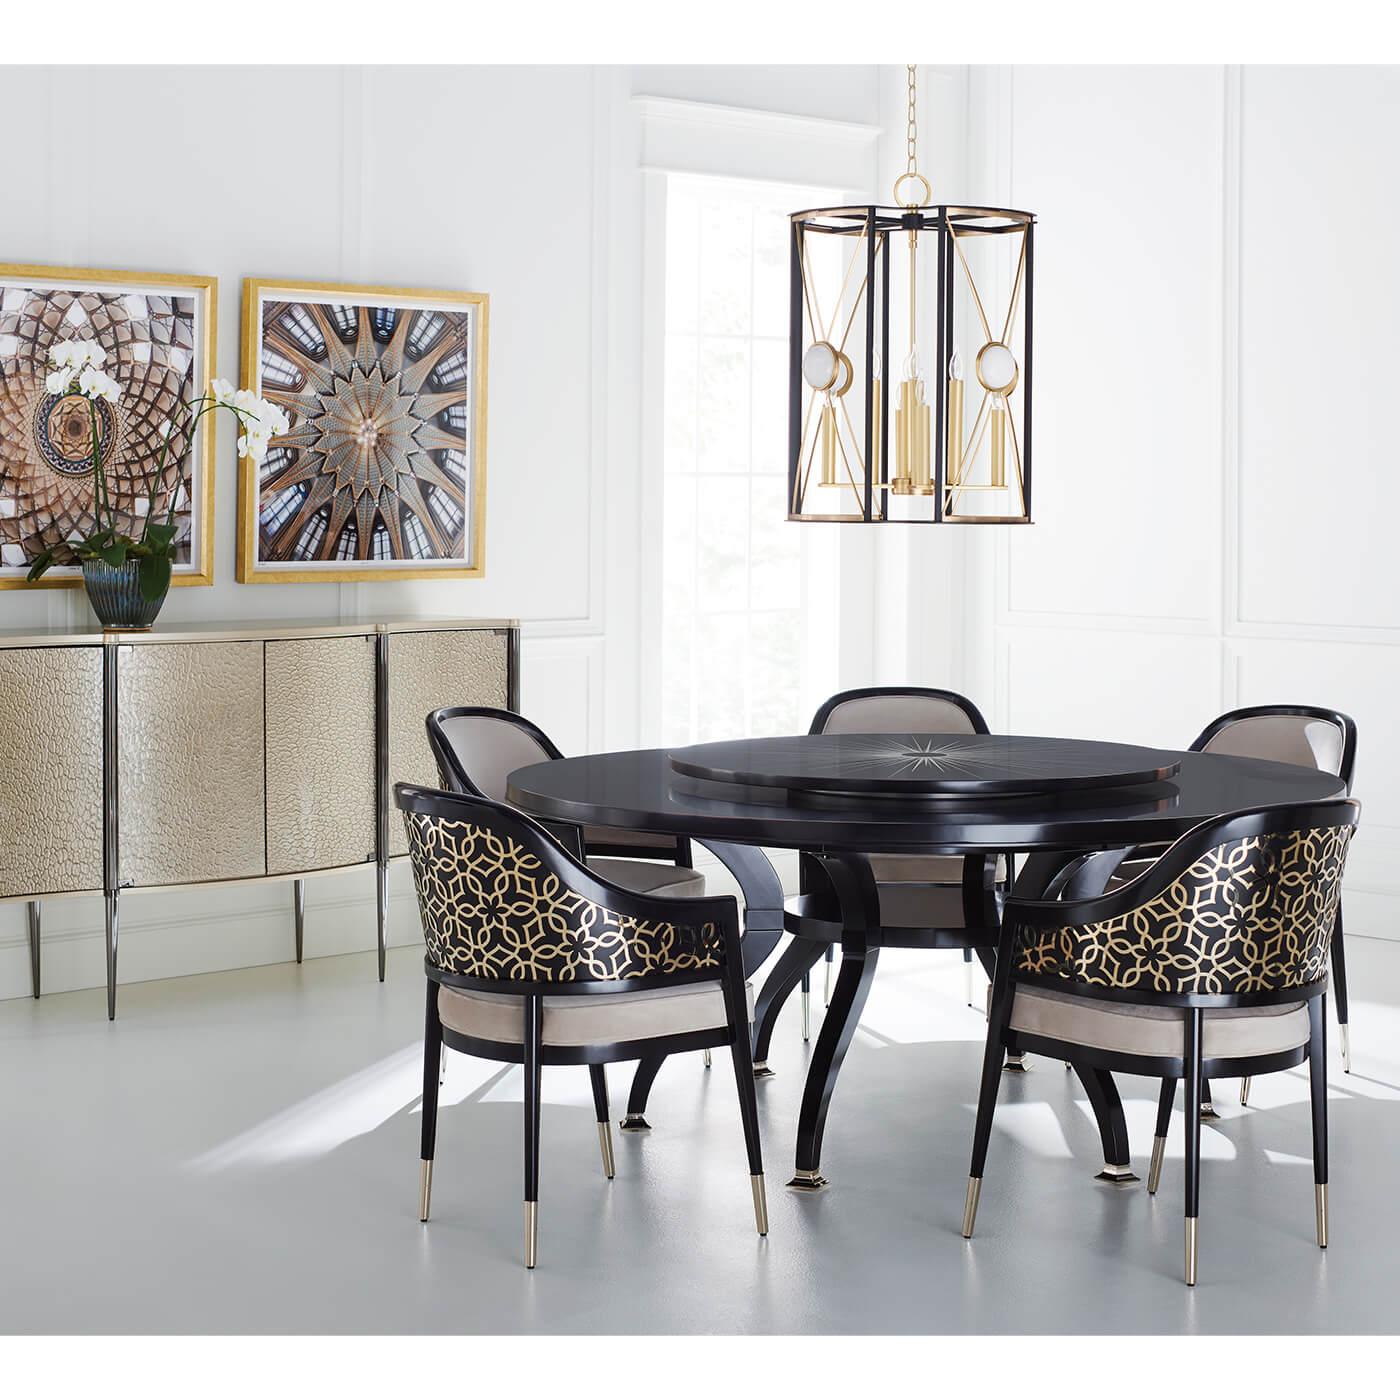 Contemporary Mid Century Style Round Dining Table